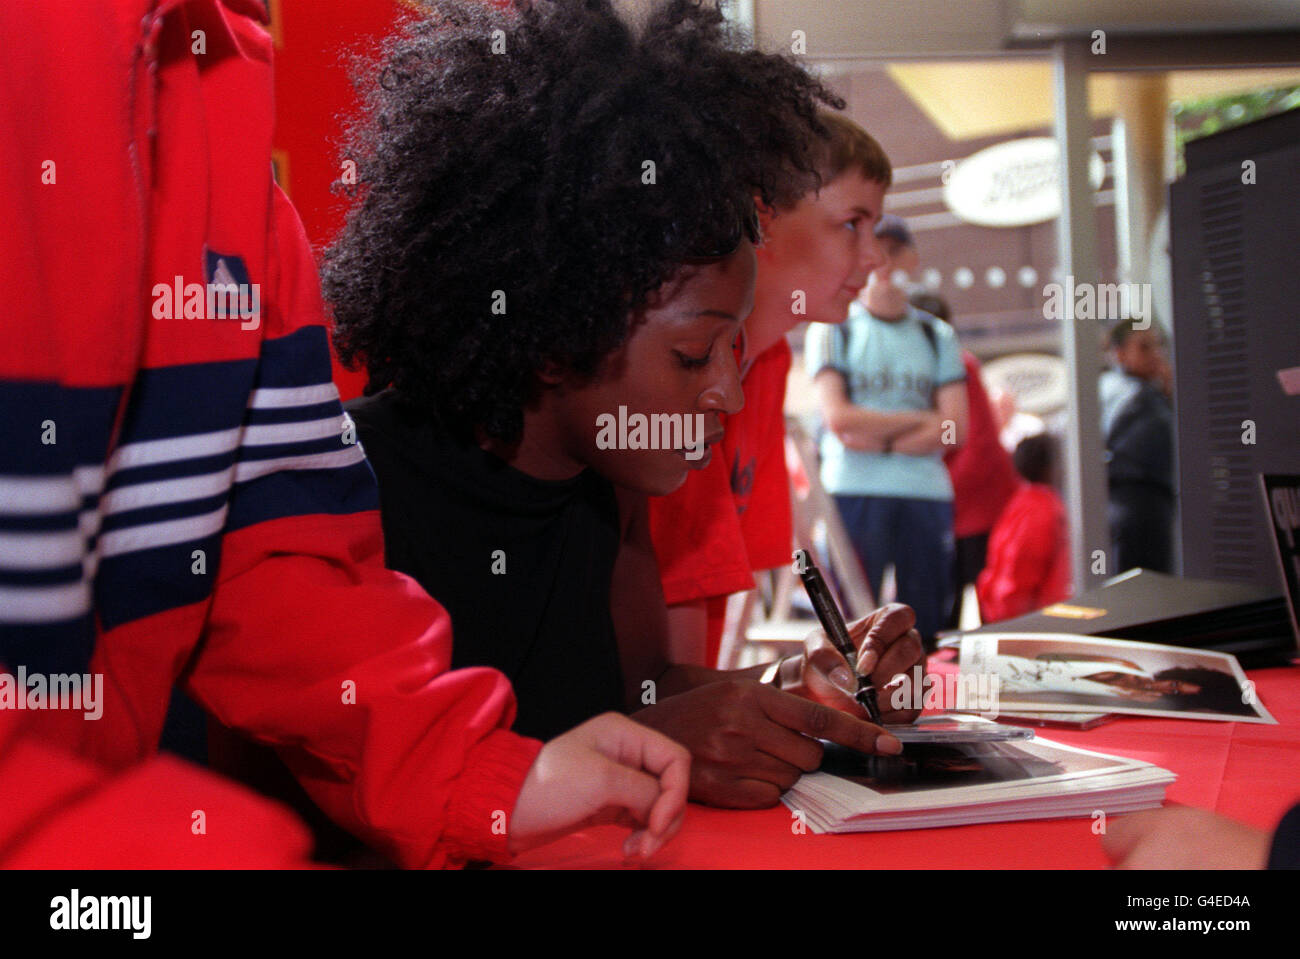 PA NEWS 30/7/98 SINGER MICA PARIS SIGNS AUTOGRAPHS FOR FANS AT A NEW VIRGIN MEGASTORE IN SLOUGH, WHCIH SHE OPENED. THE STORE MARKED THE COMPLETION OF THE FIRST JOINT VENTURE BETWEEN VIRGIN RETAIL AND VIRGIN CINEMAS. Stock Photo